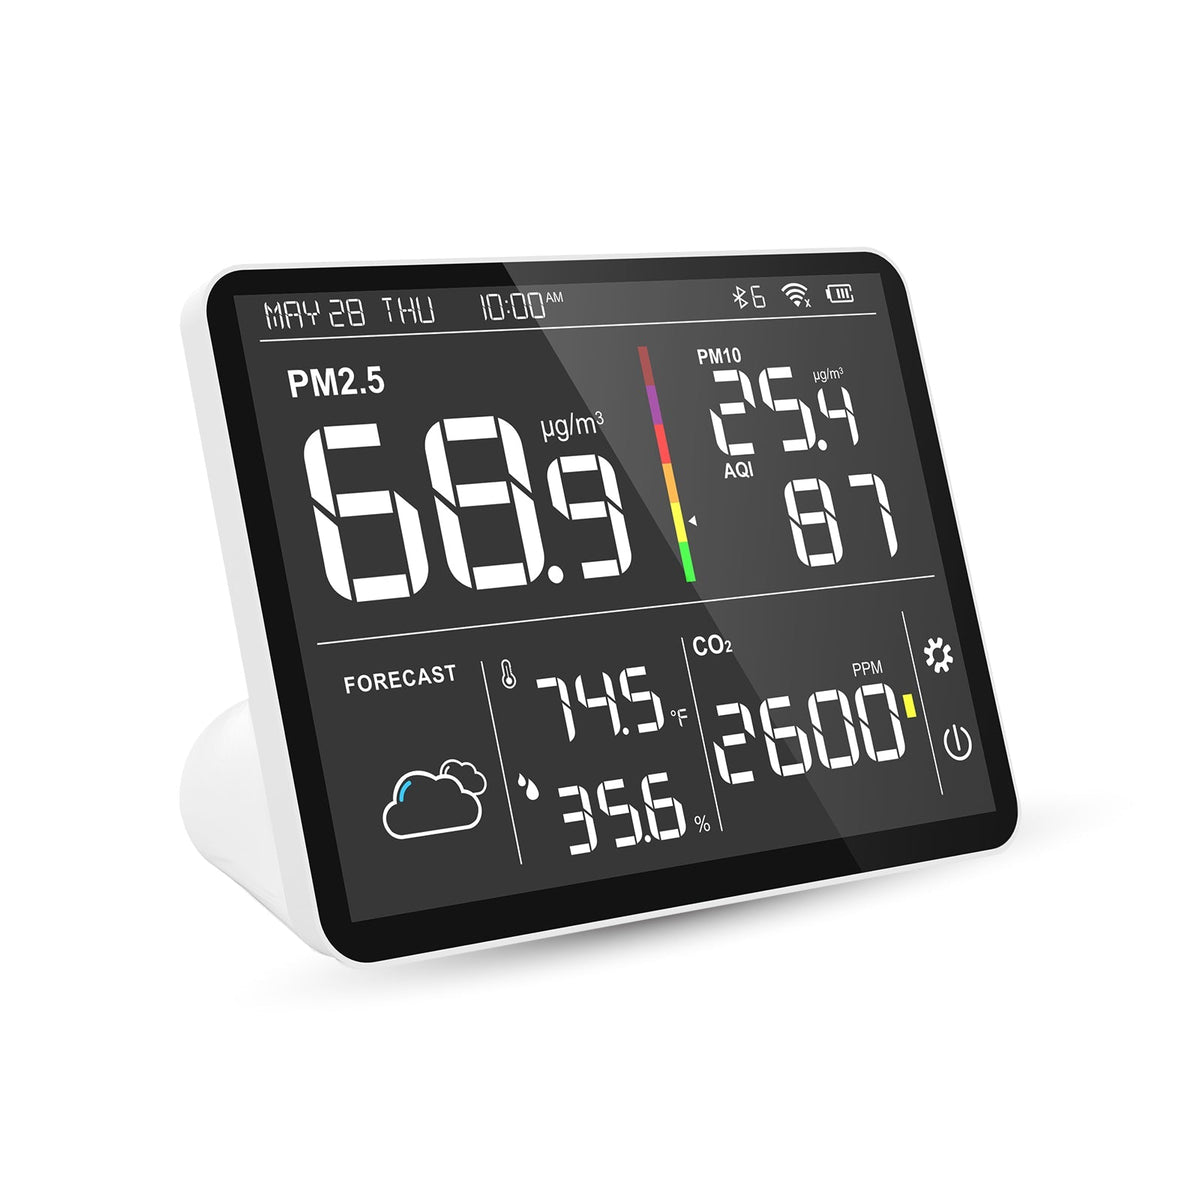 M100 8 in 1 Air Quality Monitor - eucatech Store